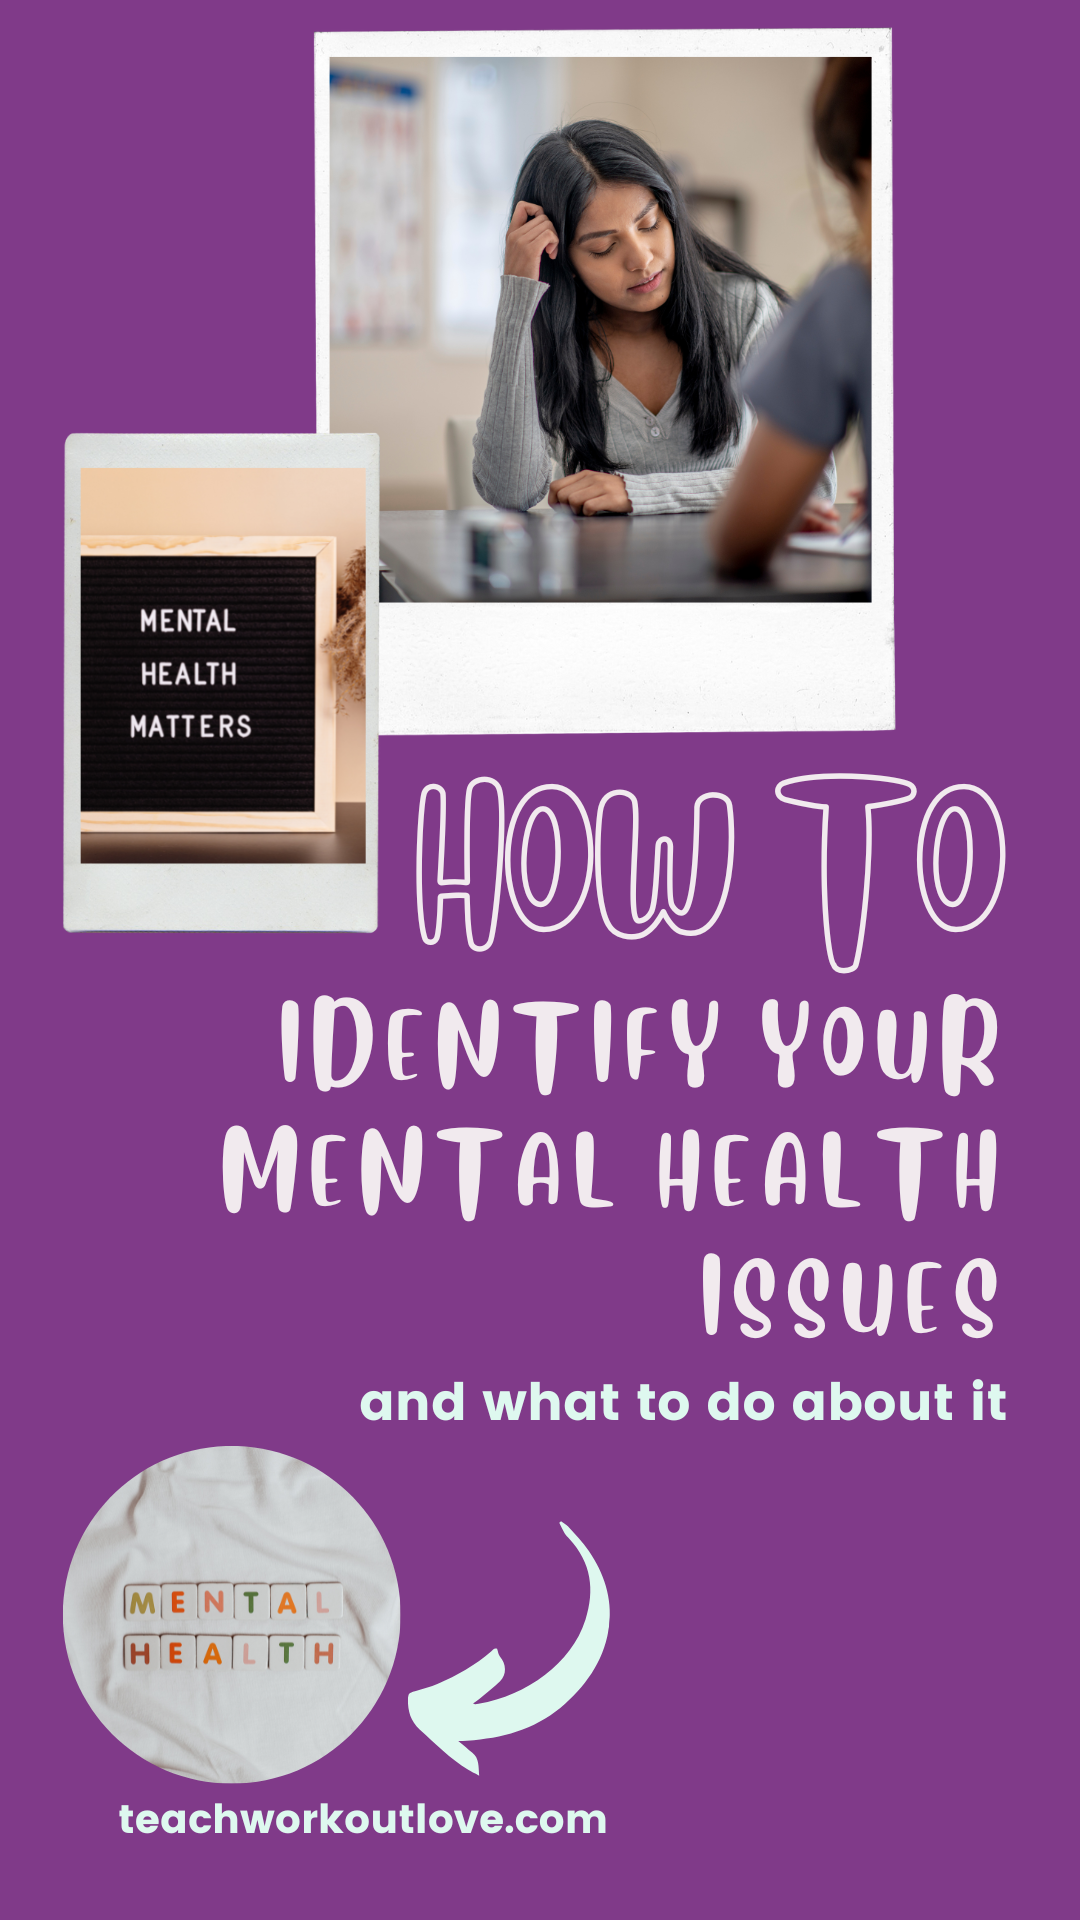 To help you on your journey, here are some top tips for identifying whether your mental health is declining, and what you can be doing.